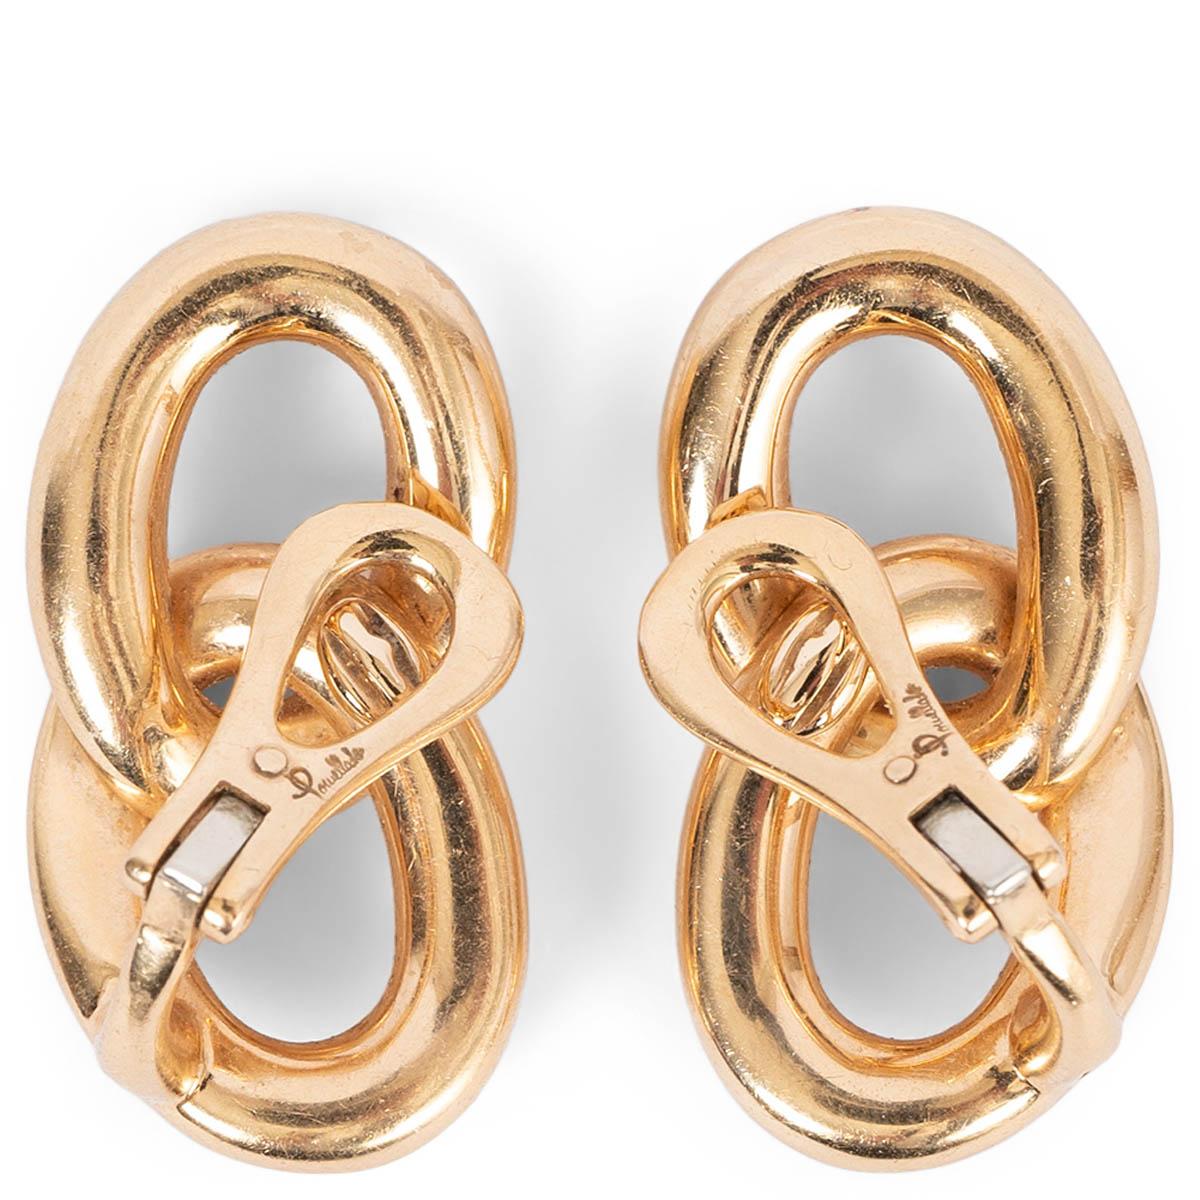 100% authentic Pomellato Catene clip-on earrings in 18k rose gold. Inspired by the signature Catene chain, the earrings feature two intertwining links. Have been worn and are in excellent condition. Come with original box and receipt.